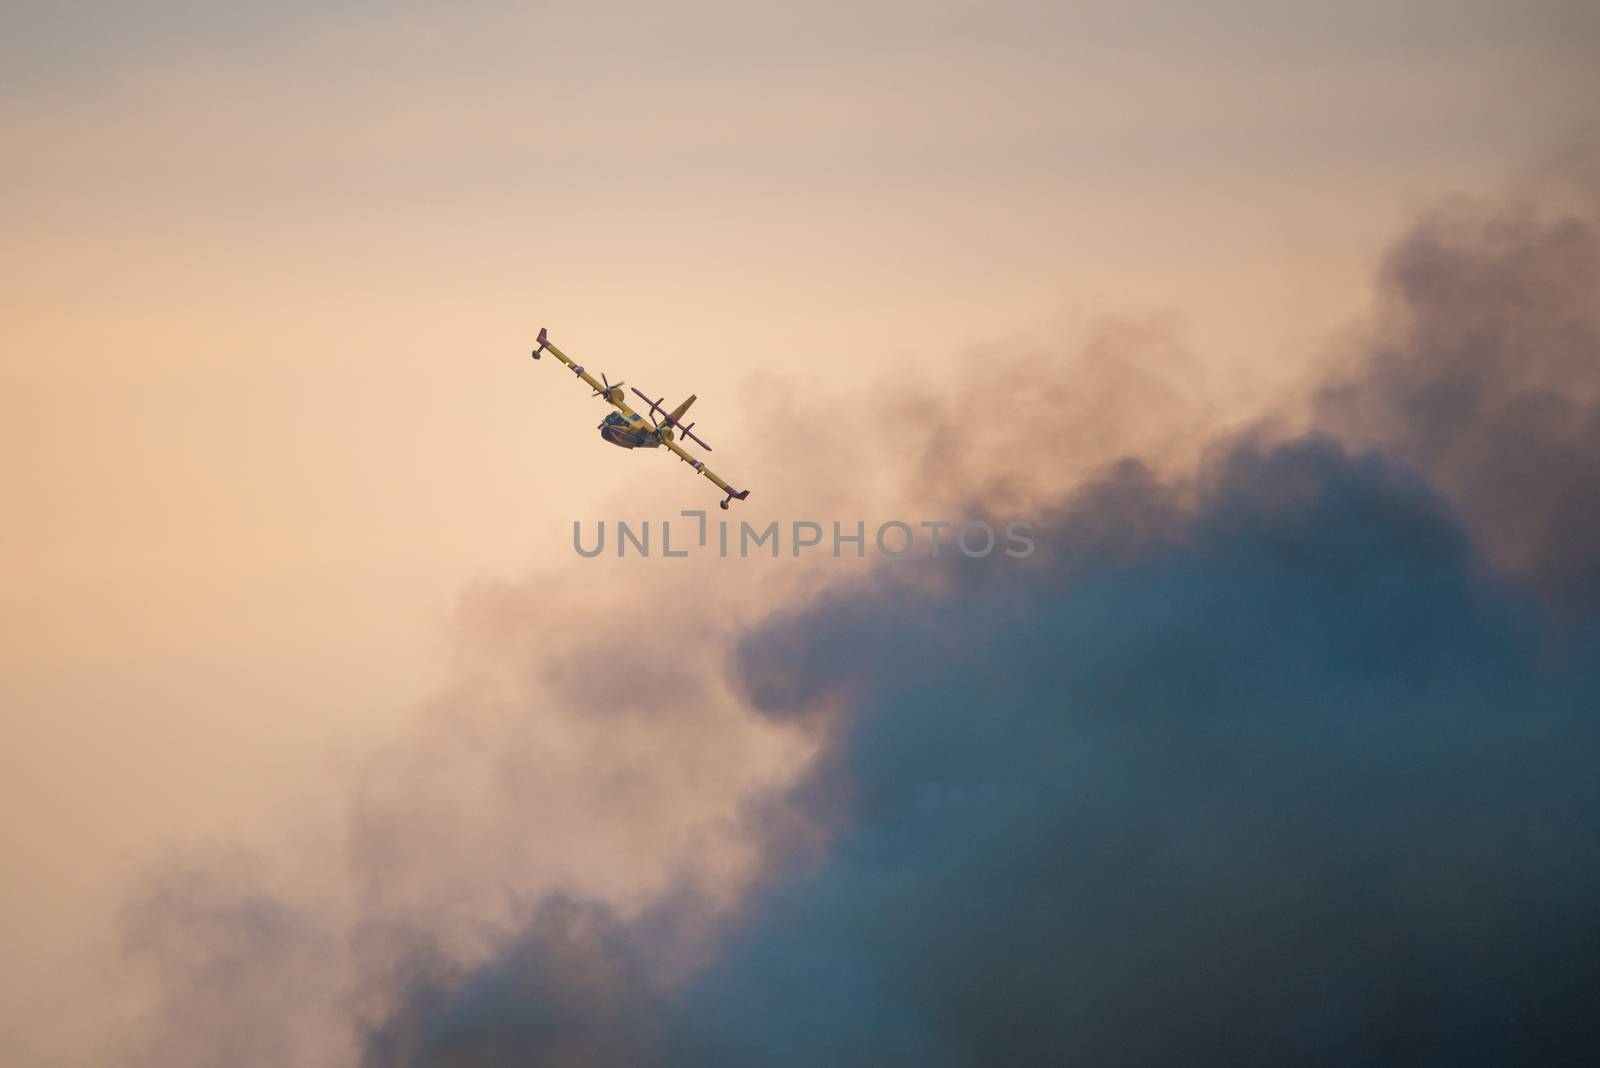 Amphibious water bomber airplane in flight at sunset, smoke from a forest fire, in France.